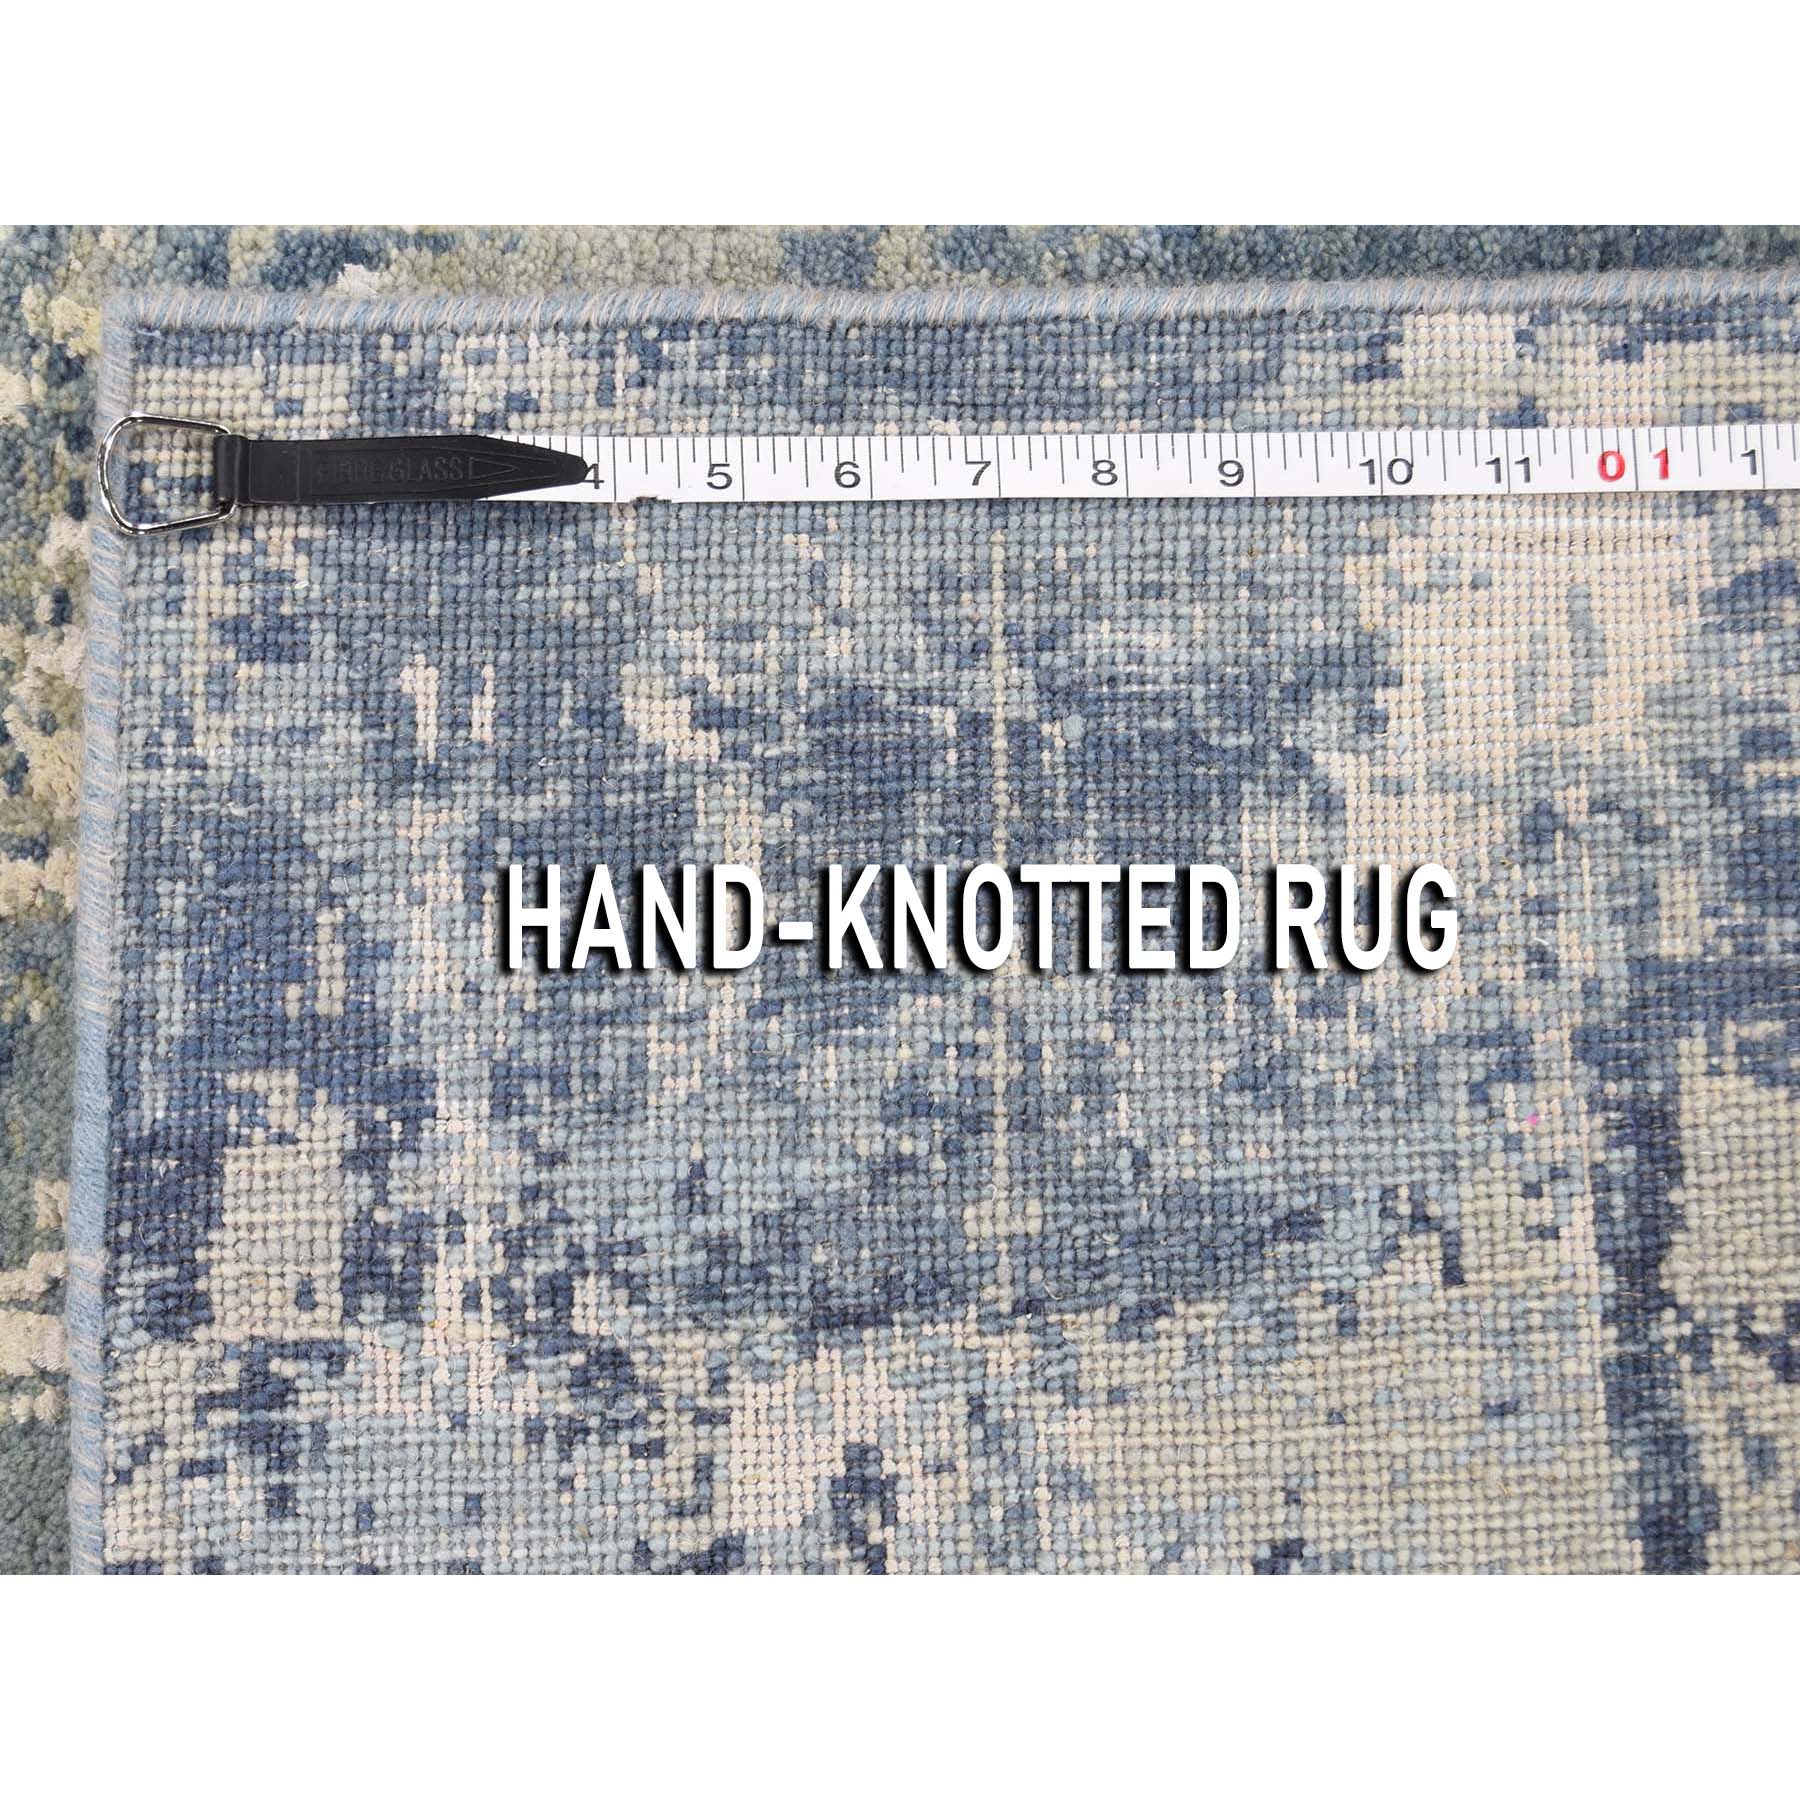 2-7 x6-1  Blue-Gray Abstract Design Wool and Pure Silk Hand-Knotted Oriental Runner Rug 